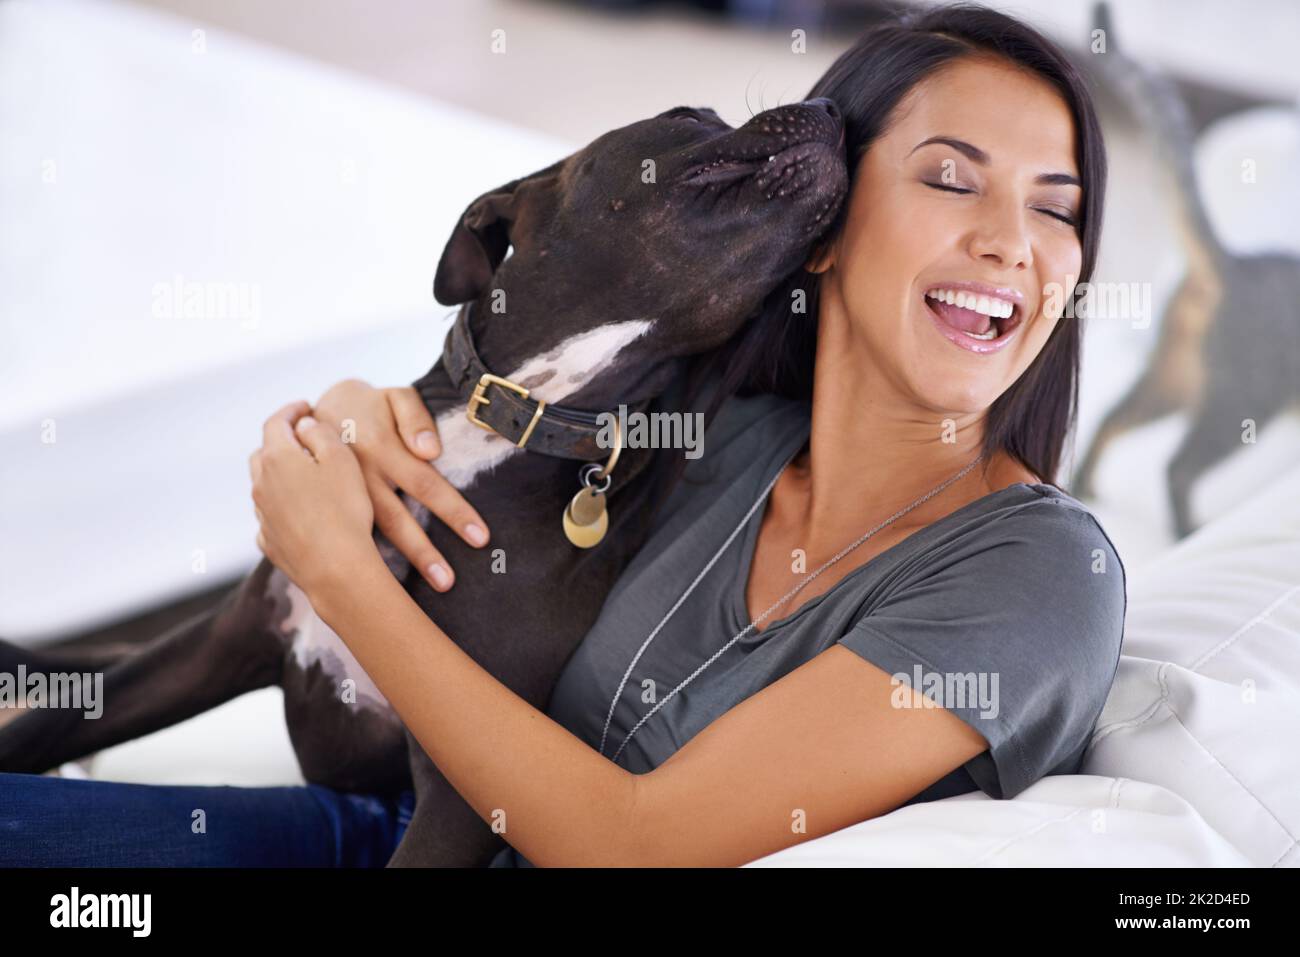 Canine companion. Shot of an attractive young woman enjoying a cuddle with her dog at home. Stock Photo